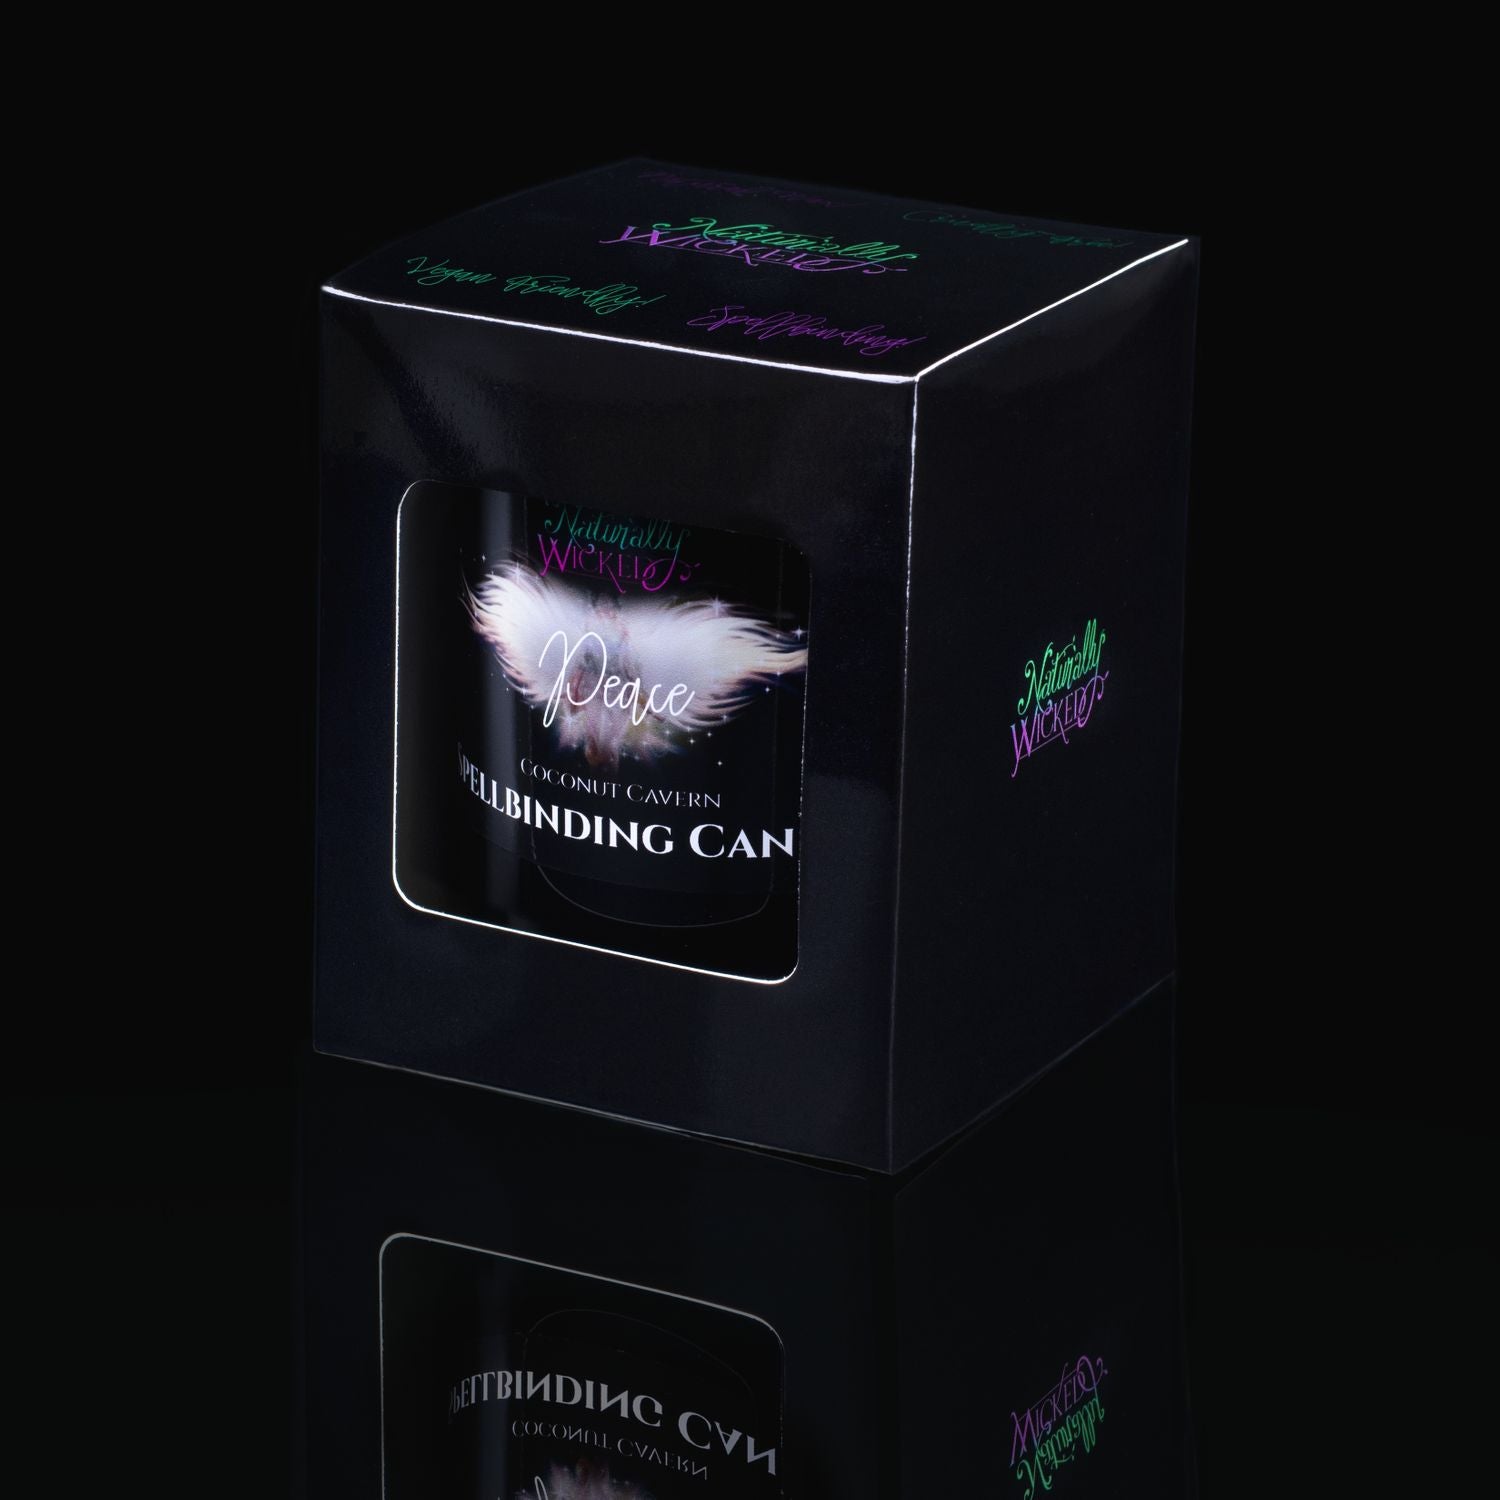 Cast The Perfect Spell With This Unique Spell Candle, Complete With A Double Sided Spell Card. Naturally Wicked Spellbinding Peace Candle Displayed In A Sleek Black Gloss Gift Box. The Candle Features Plant-Based Smooth Pure White Wax, A Wood Wick And A Beautiful Clear Quartz  Crystal.